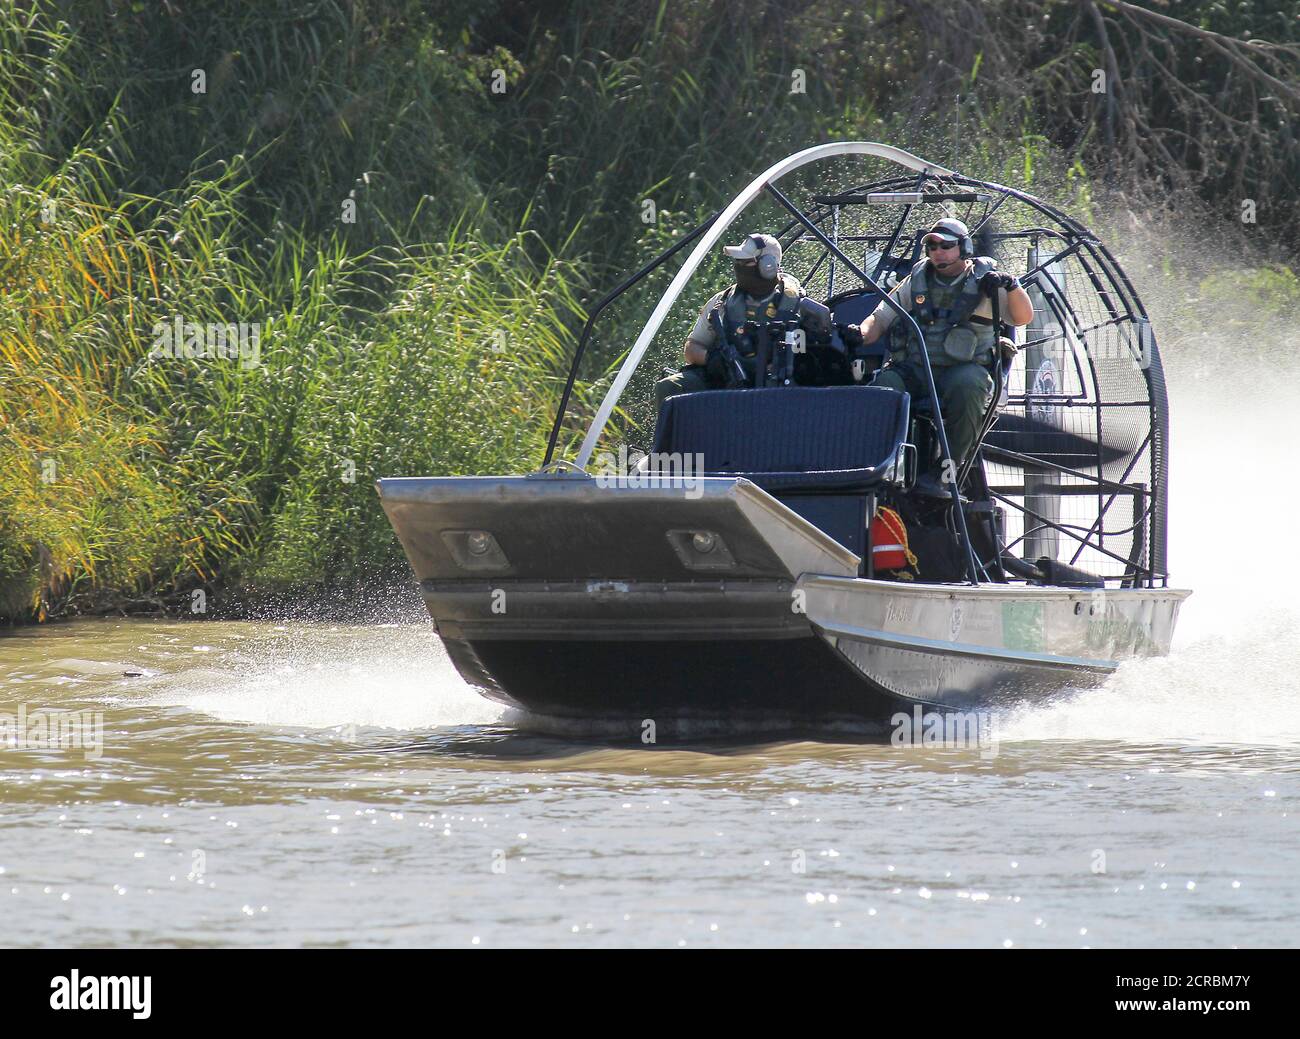 Border Patrol conducts patrols in an Air-Boat in South Texas, Laredo, along the Rio Grande Valley river on September 26, 2013. Stock Photo